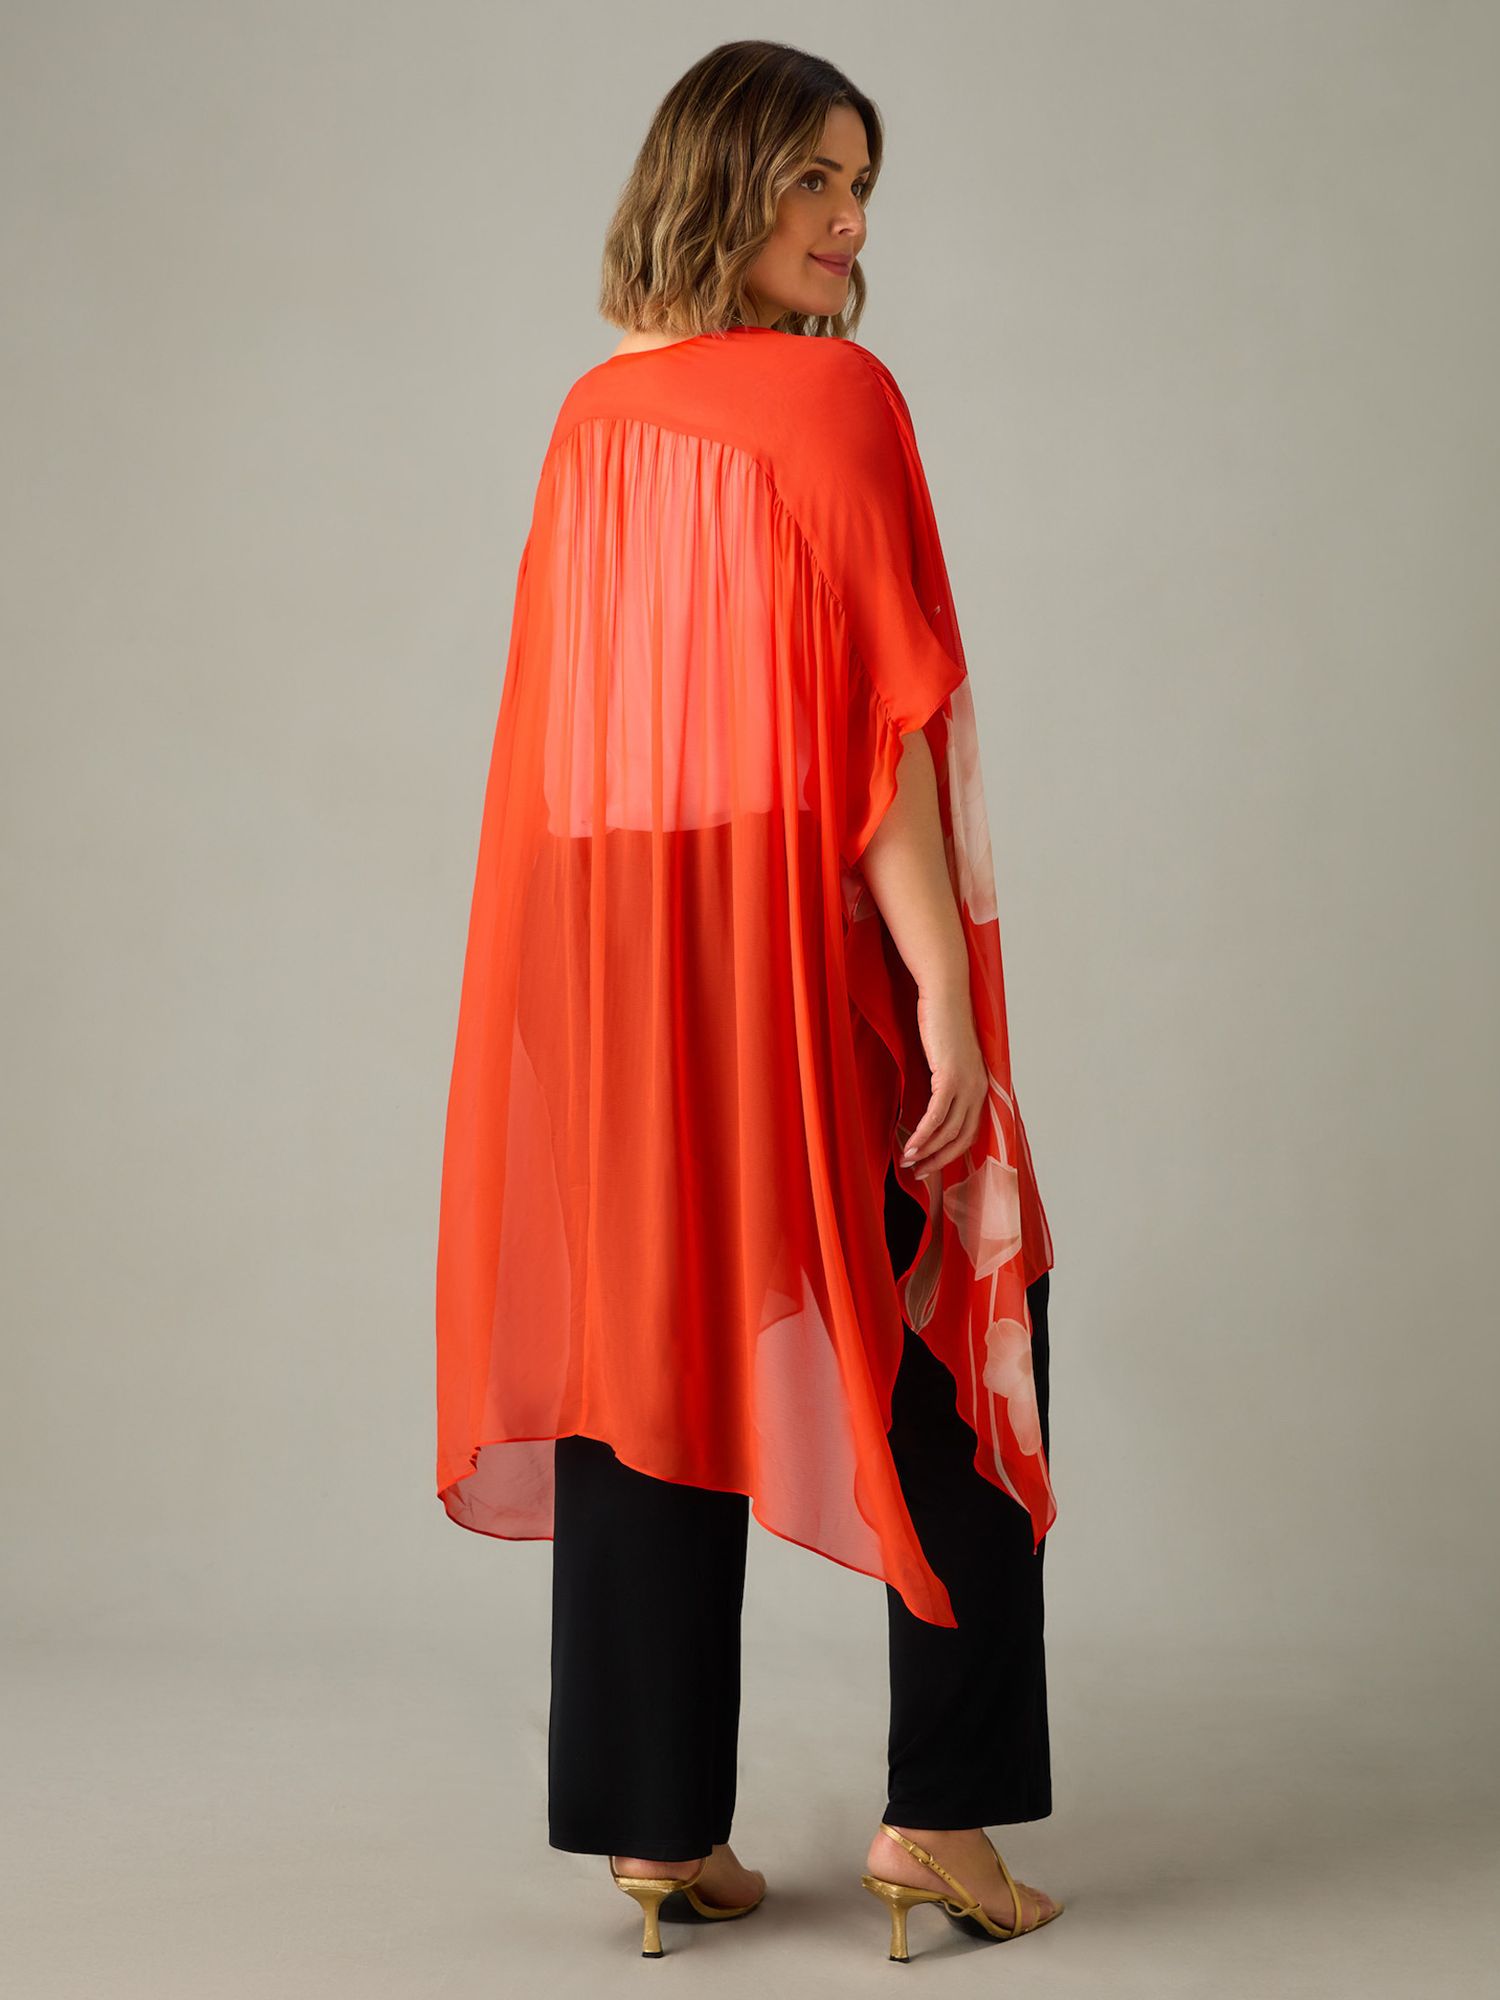 Buy Live Unlimited Curve Floral Kimono, Red Online at johnlewis.com